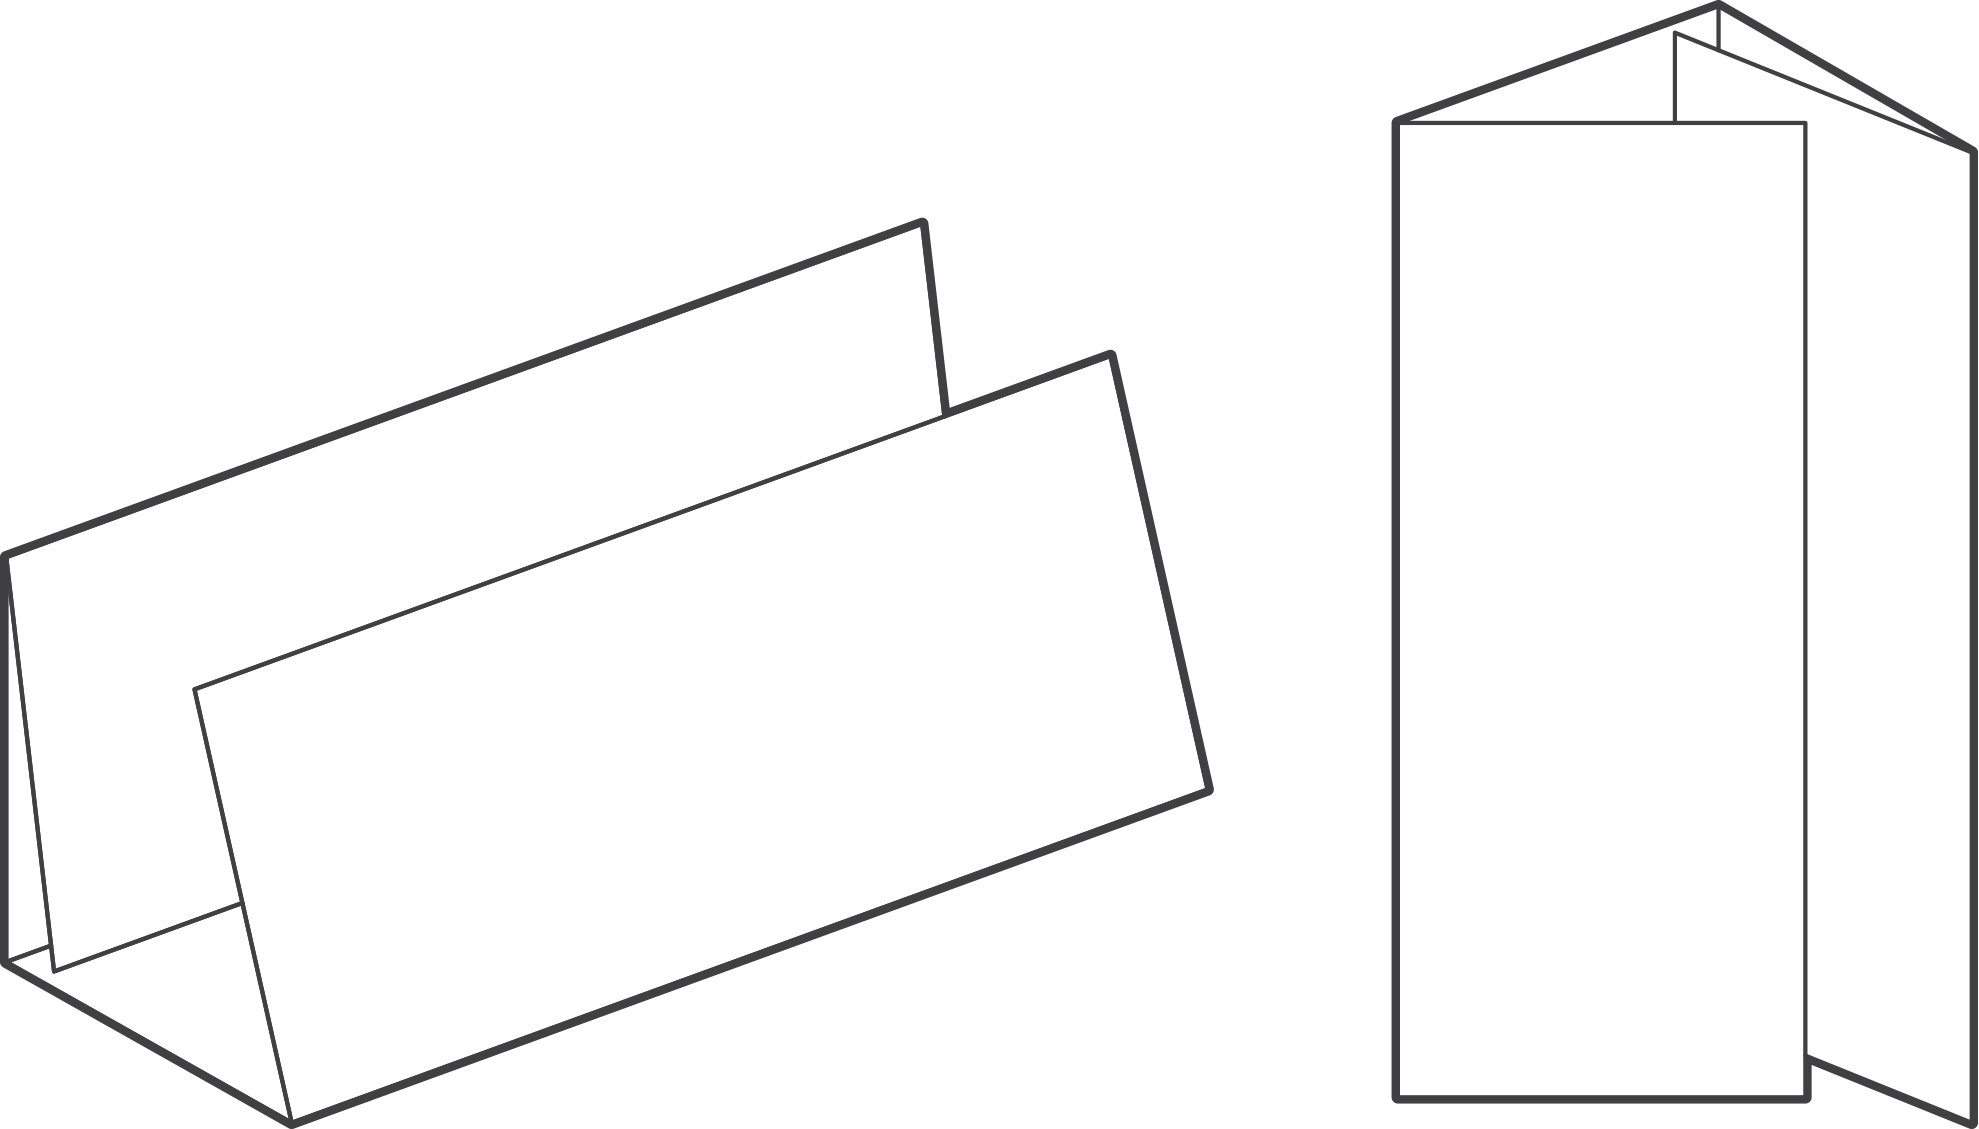 A drawing of this type of postal guide